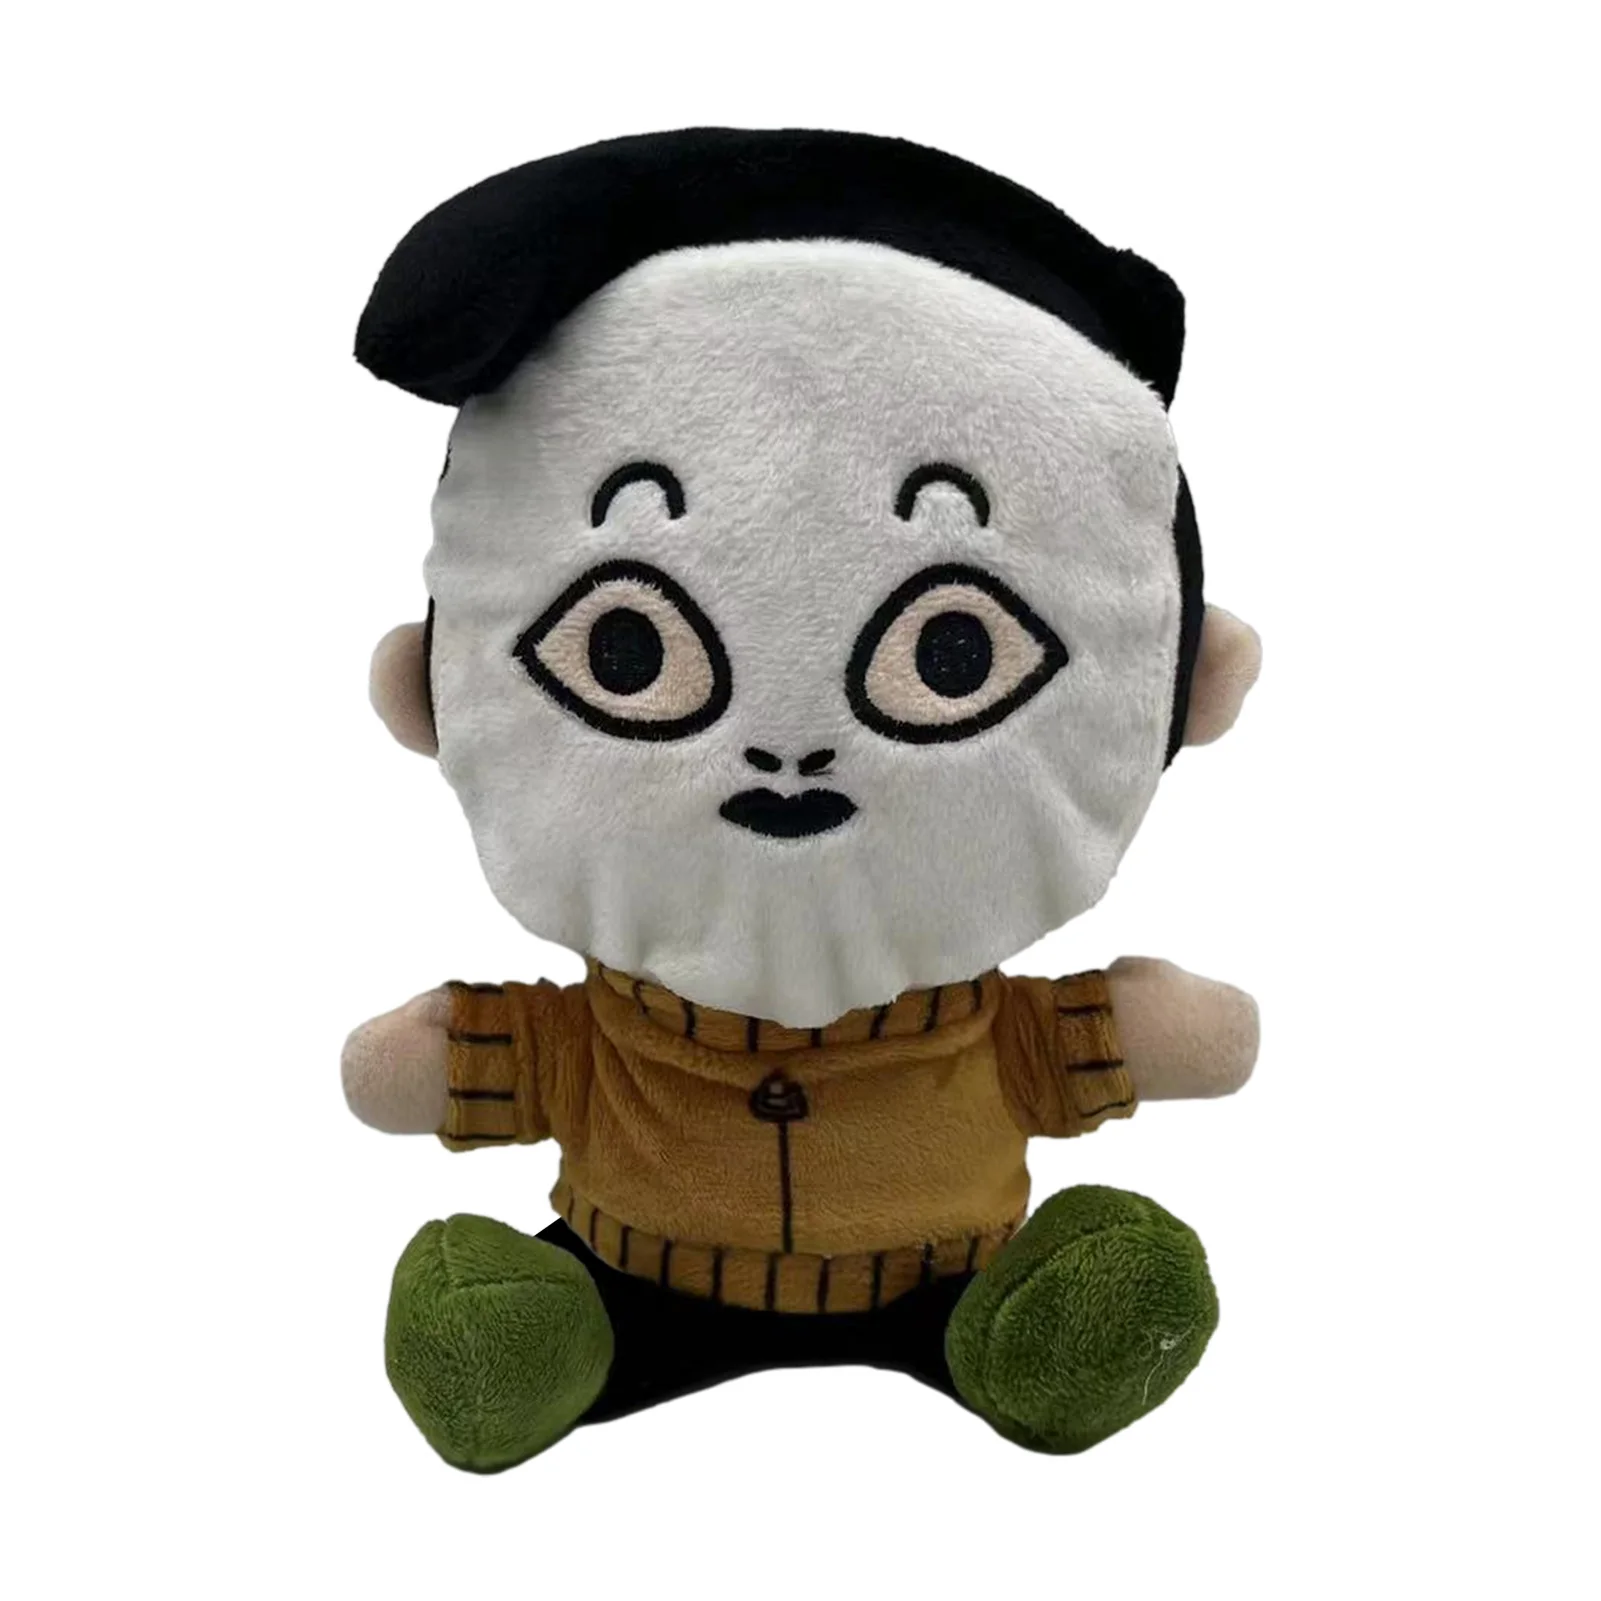 Marble Hornets Masky Plush Toy Marble Wasp Doll Boys Girls Soft Stuffed Toys Kids Room Decor Children Birthday Christmas Gifts marbling painting art kit water color paint set marble painting kit christmas thanksgiving easter holiday gifts for boys and